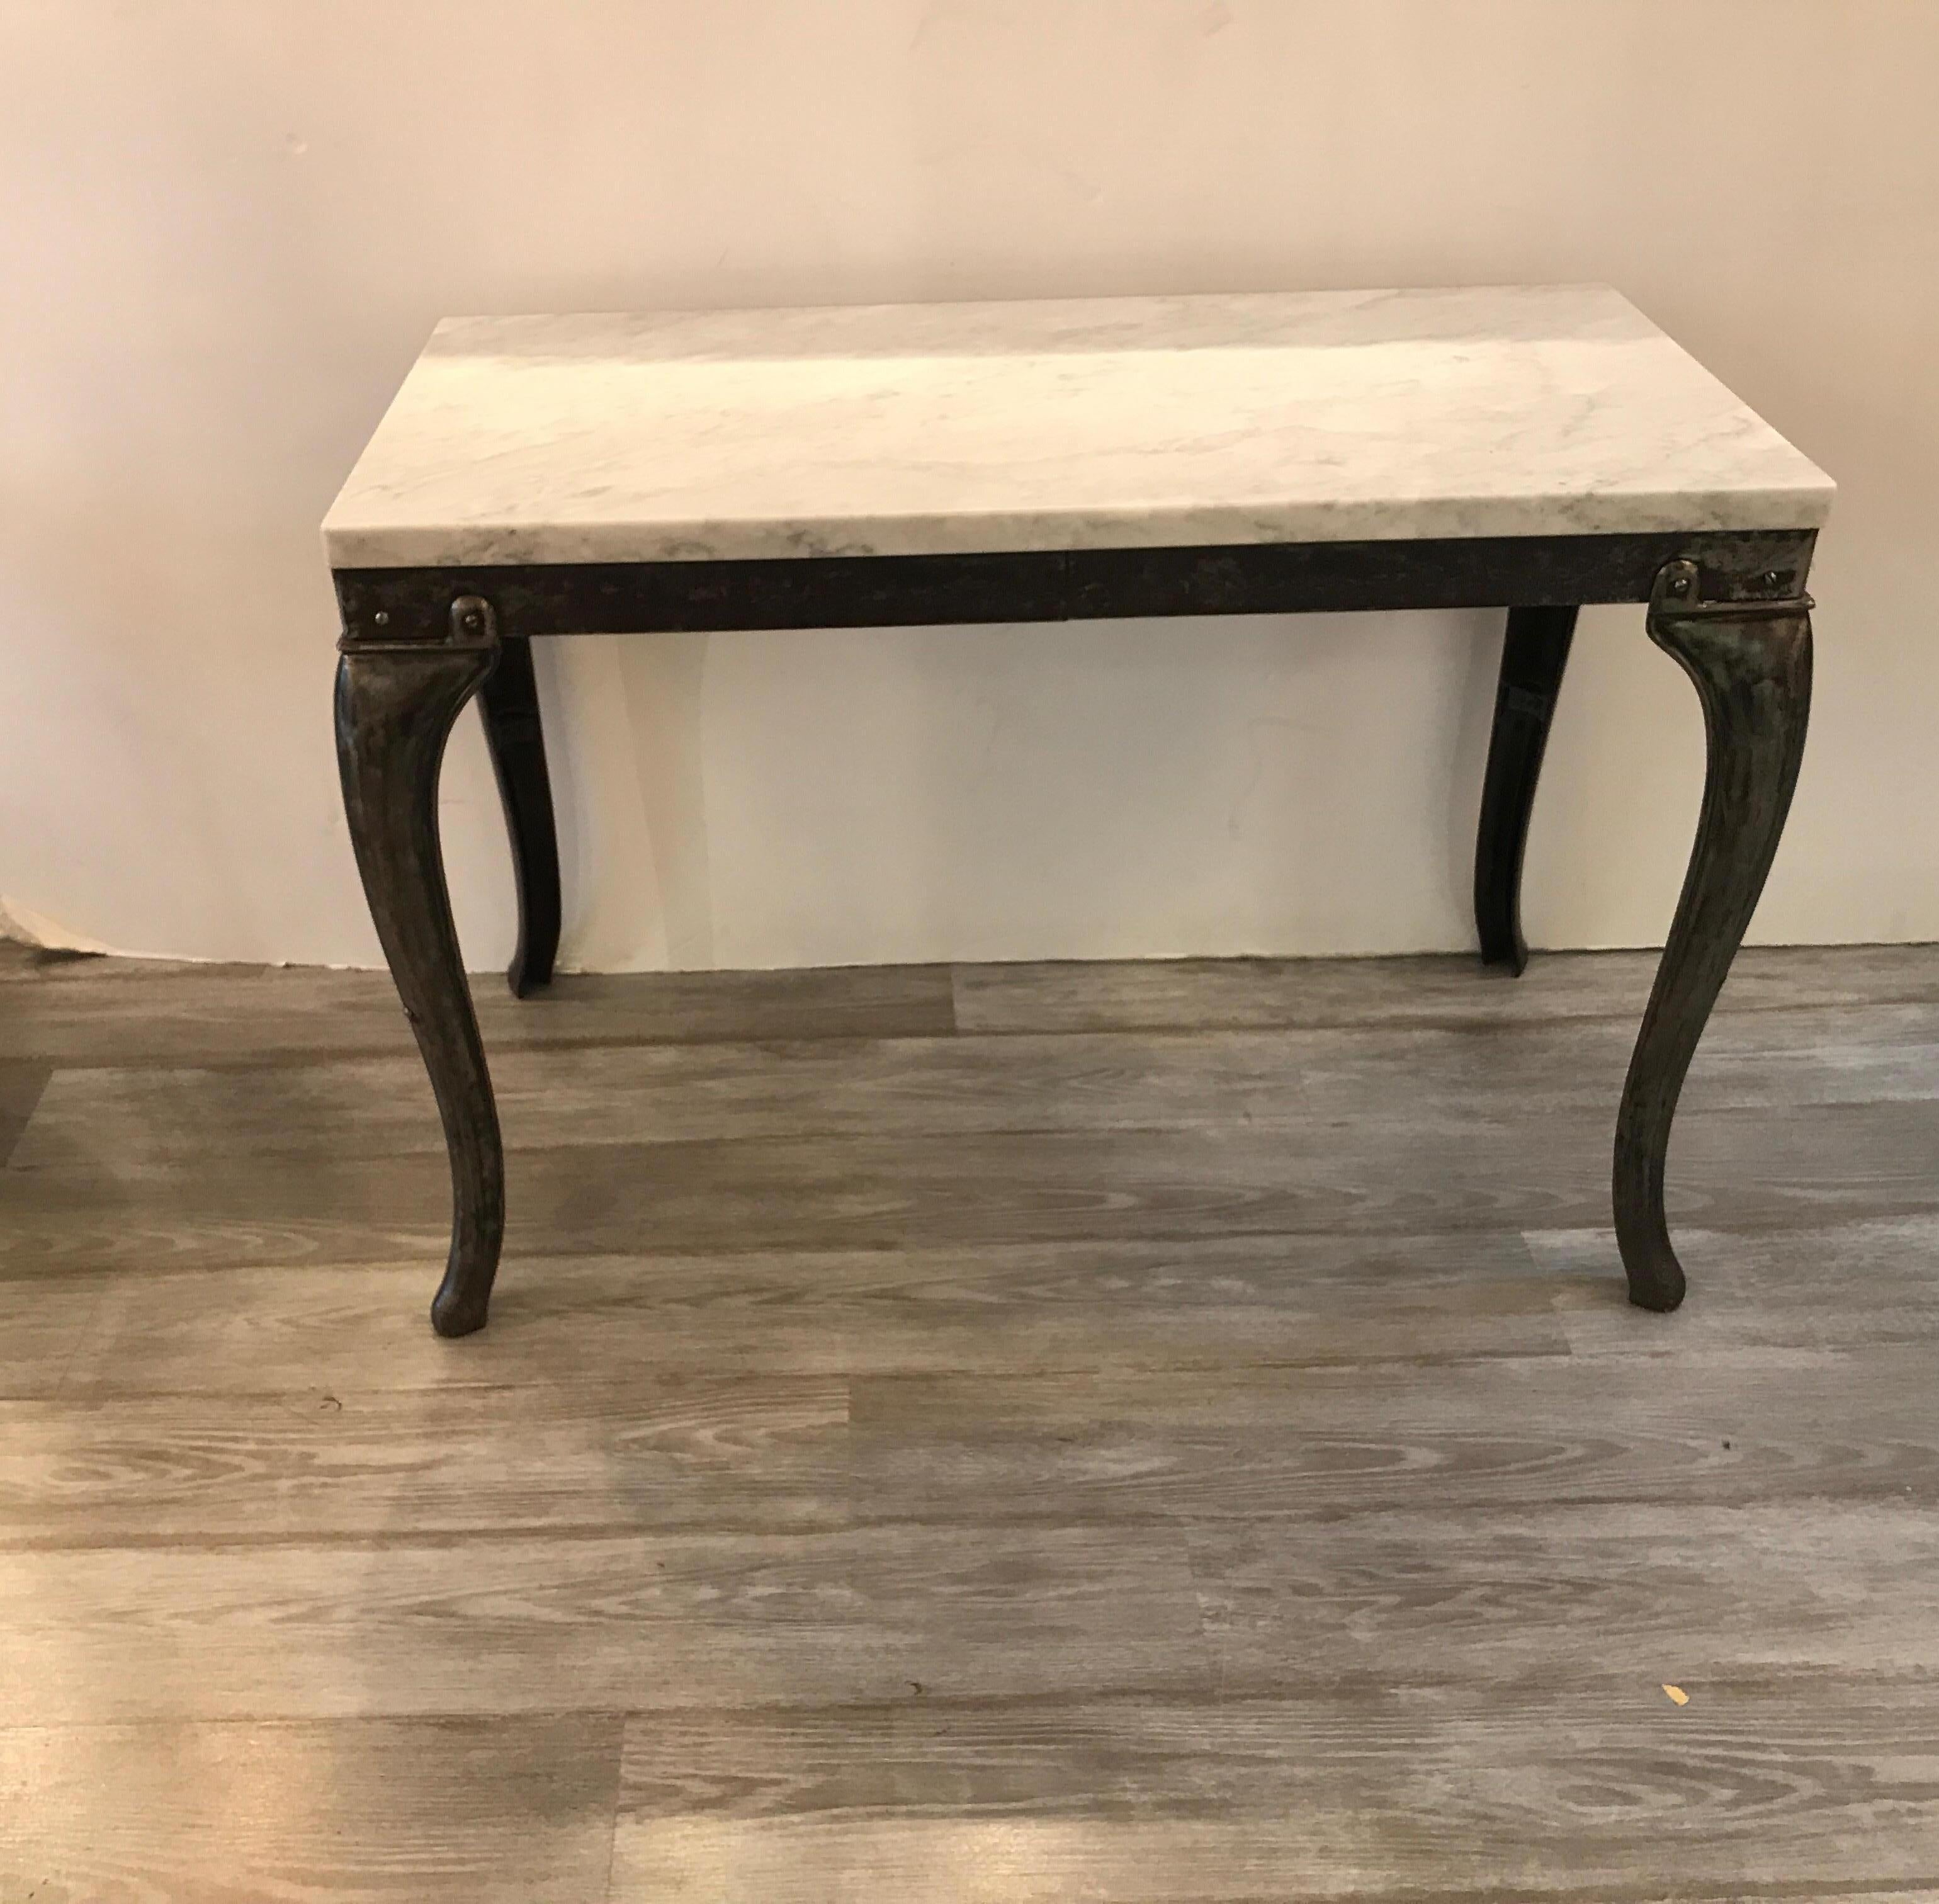 Unusual Industrial rectangular table with burnised steel base and marble-top. The tradition form with an Industrial flair in steel with and aged finish.